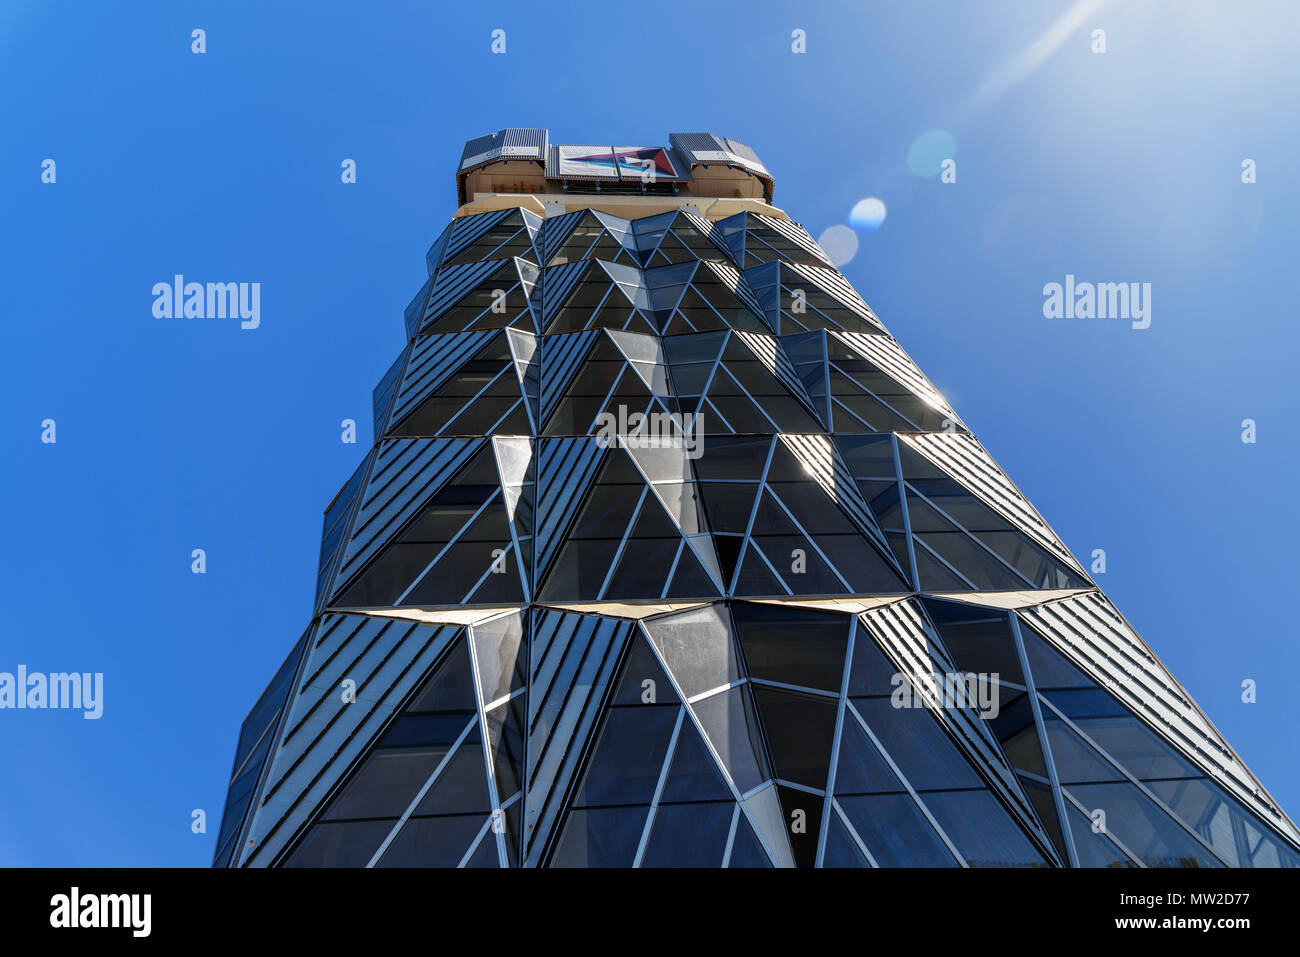 Yekaterinburg, Russia - May 23, 2018: New modern building on Gorky Street near embankment of Iset River Stock Photo